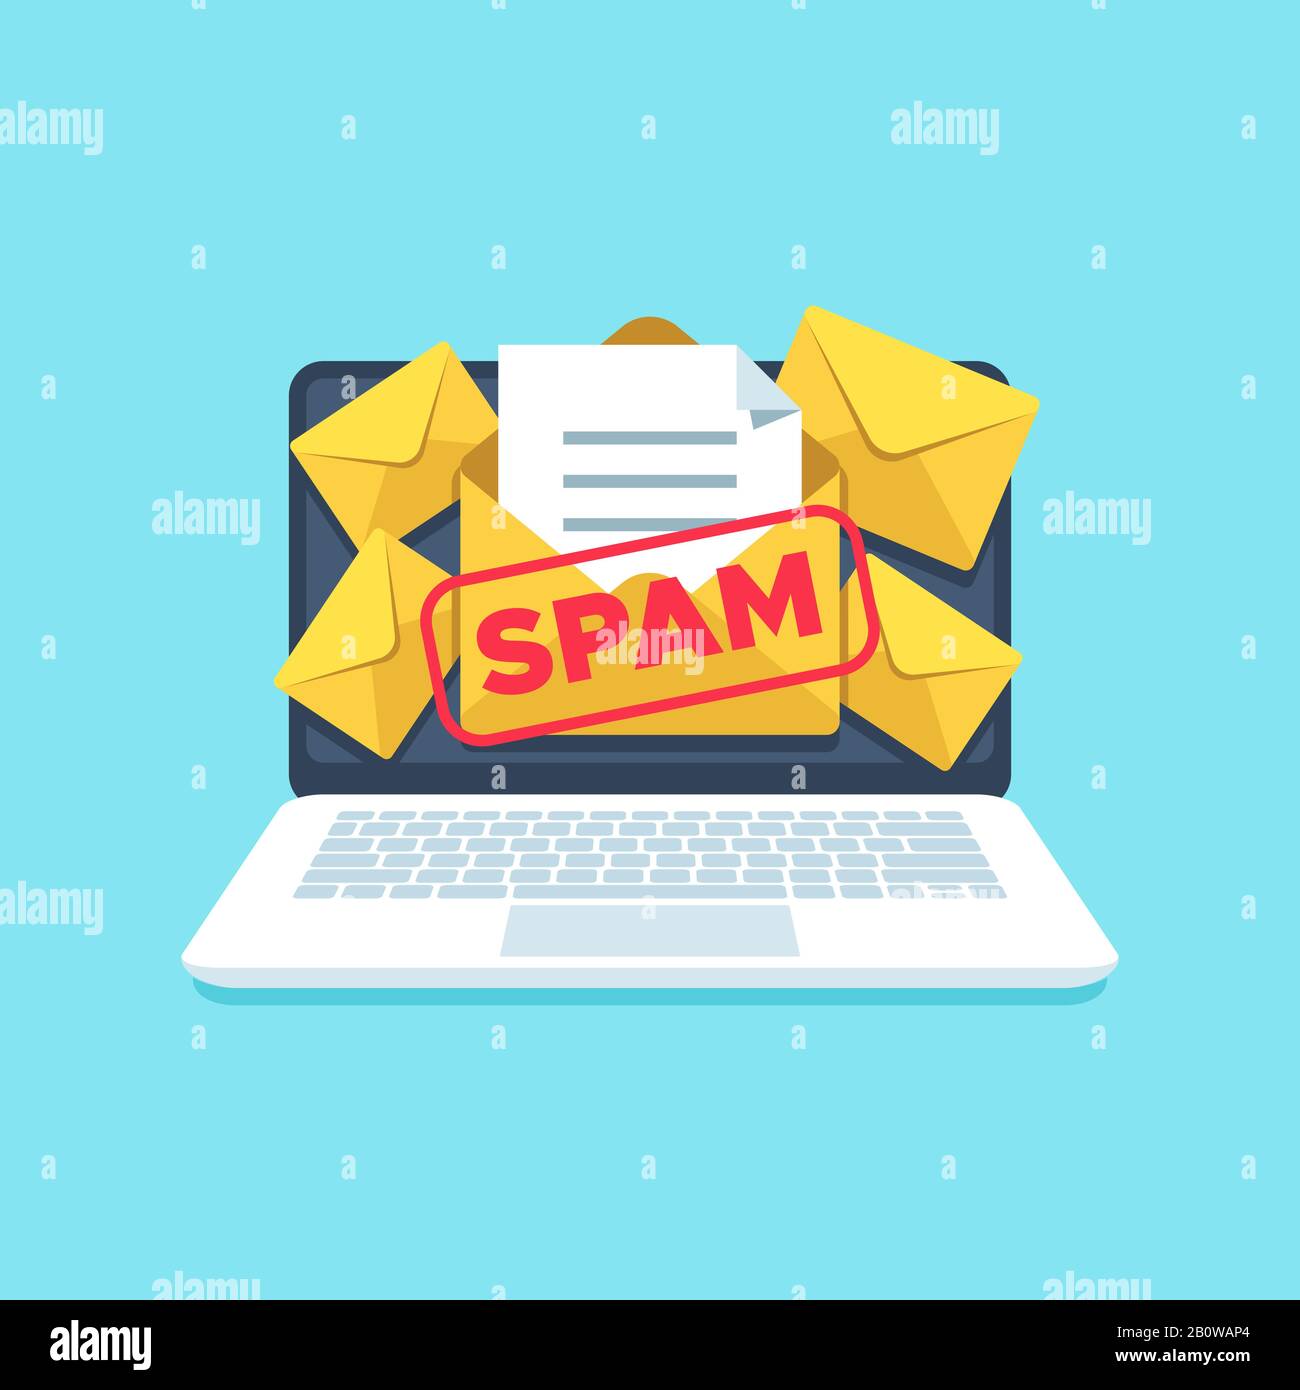 Full email inbox of spam. Spammer letters in mailbox on computer screen. Computers virus scam messages in letterbox vector illustration Stock Vector